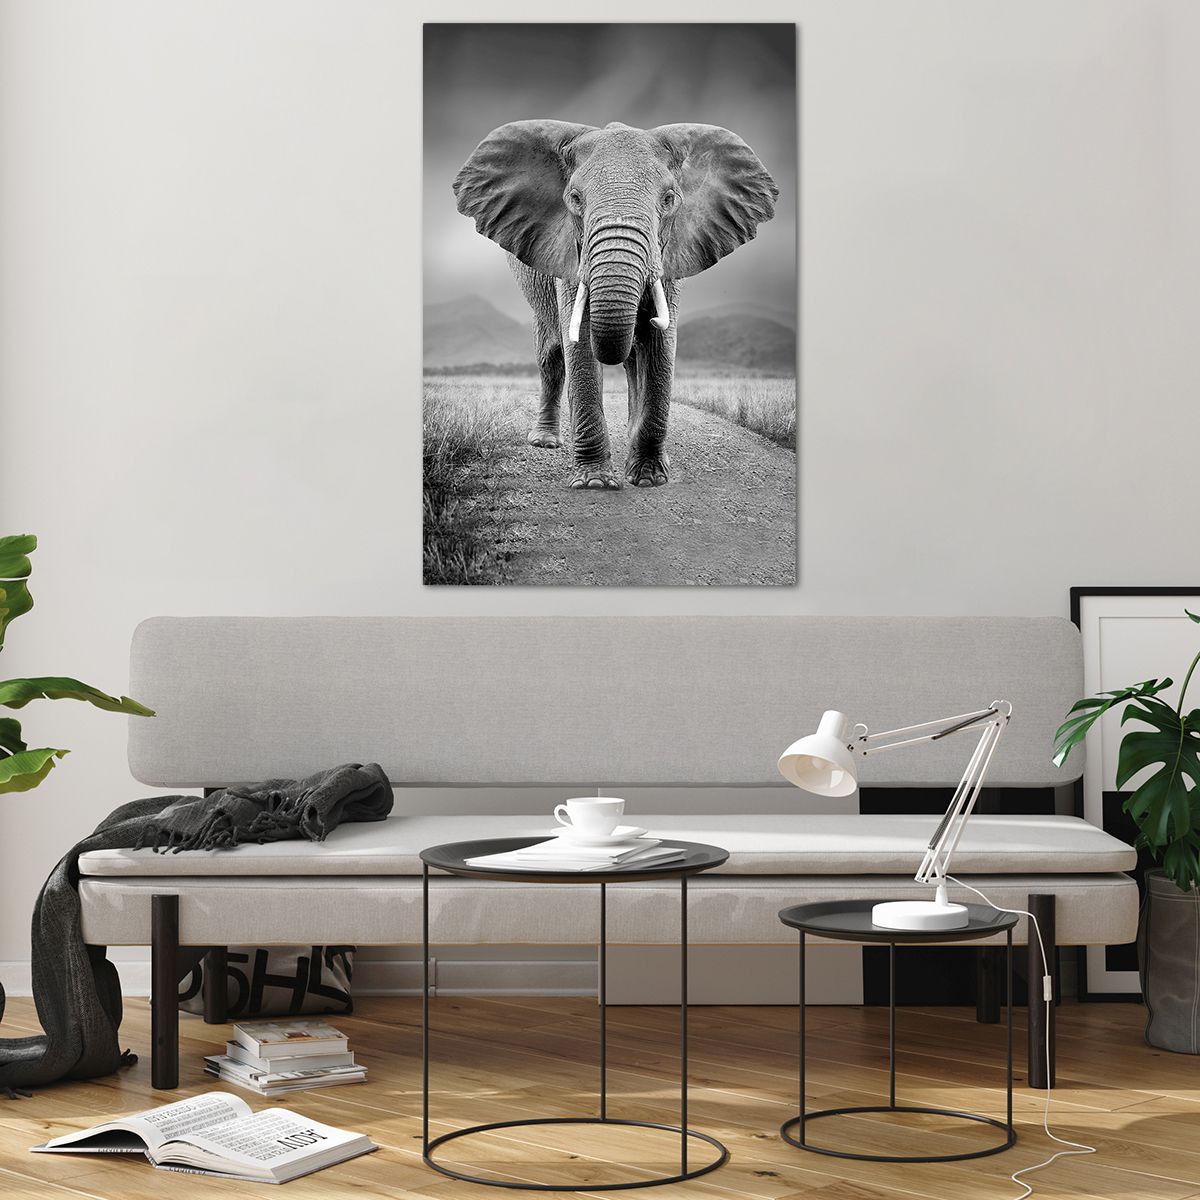 Glass picture  Elephant, Glass picture  Animals, Glass picture  Landscape, Glass picture  Nature, Glass picture  Africa